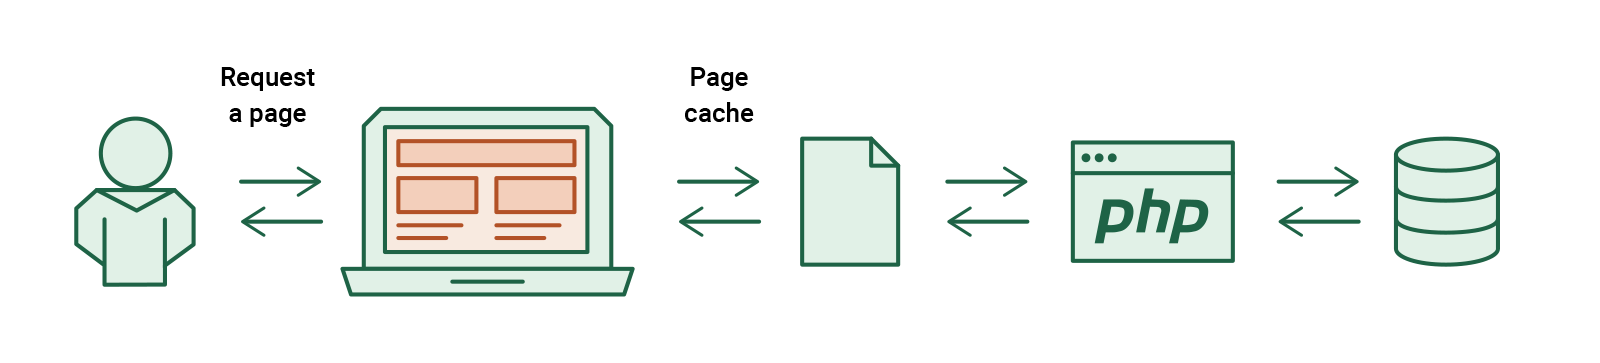 How hosting server speed affects SEO ranking of a website: Enable full-page caching